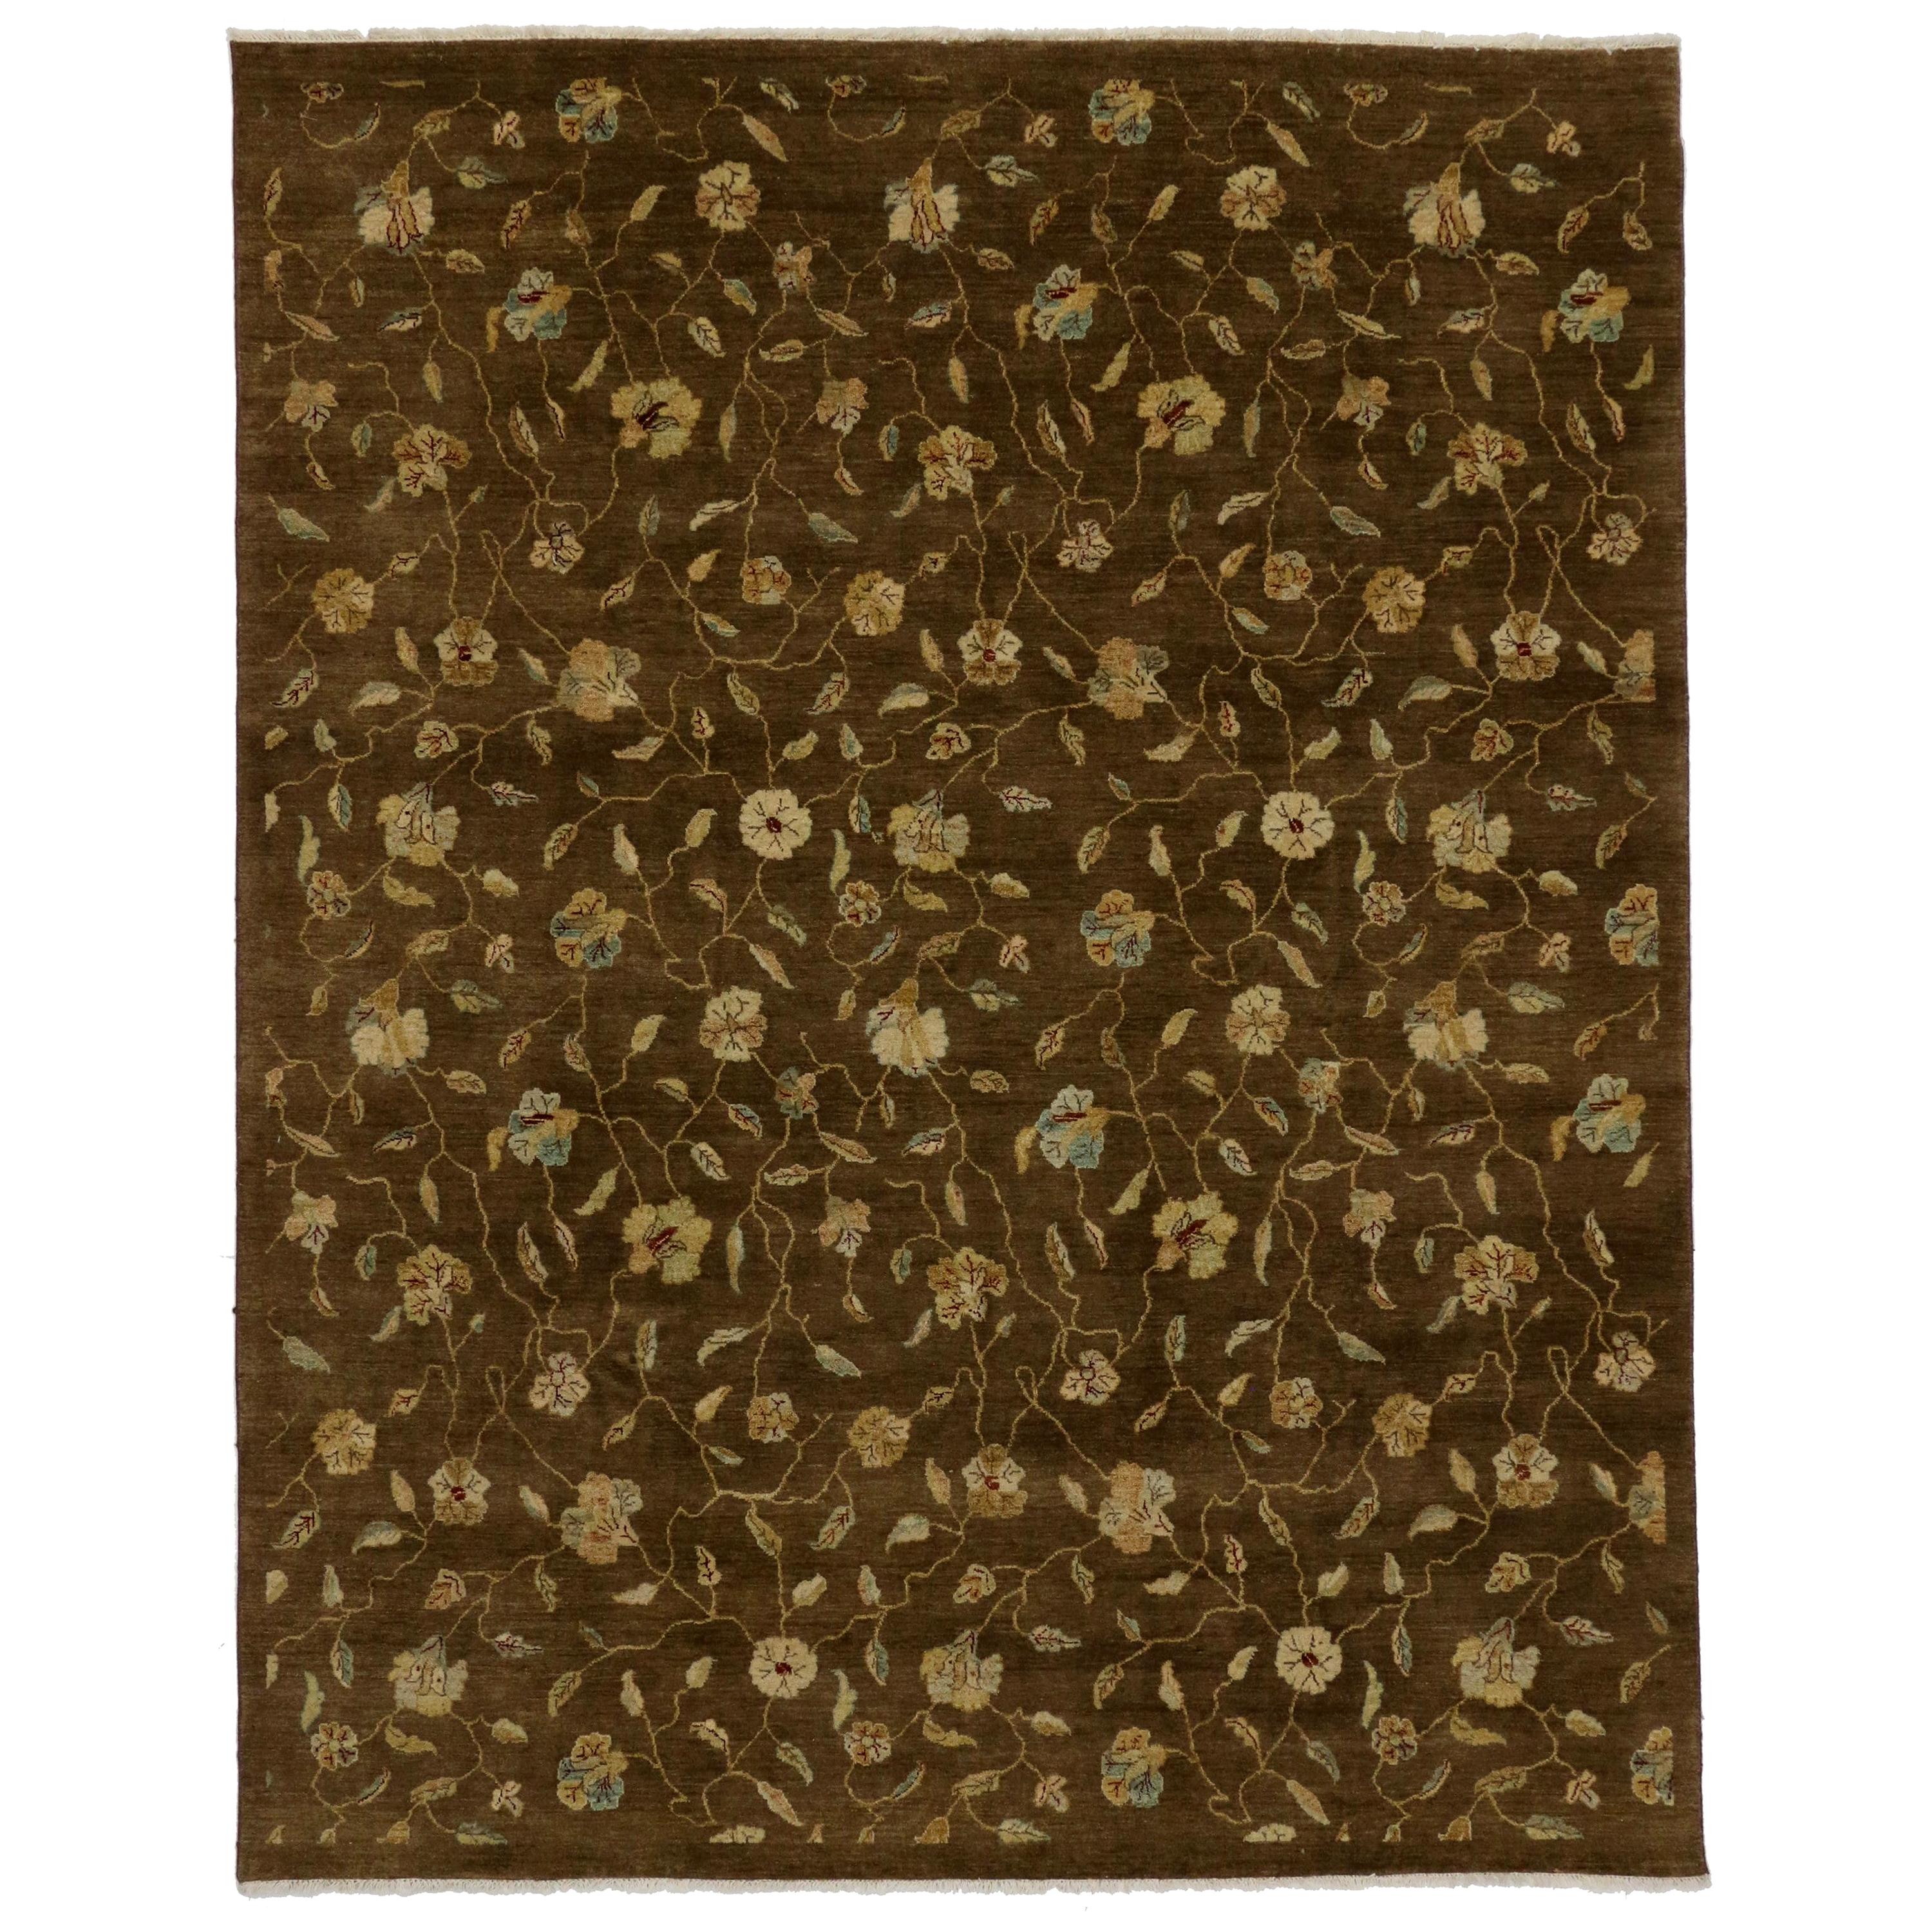 New Transitional Square Rug with Modern Style, Warm Indian Spice Tones ...